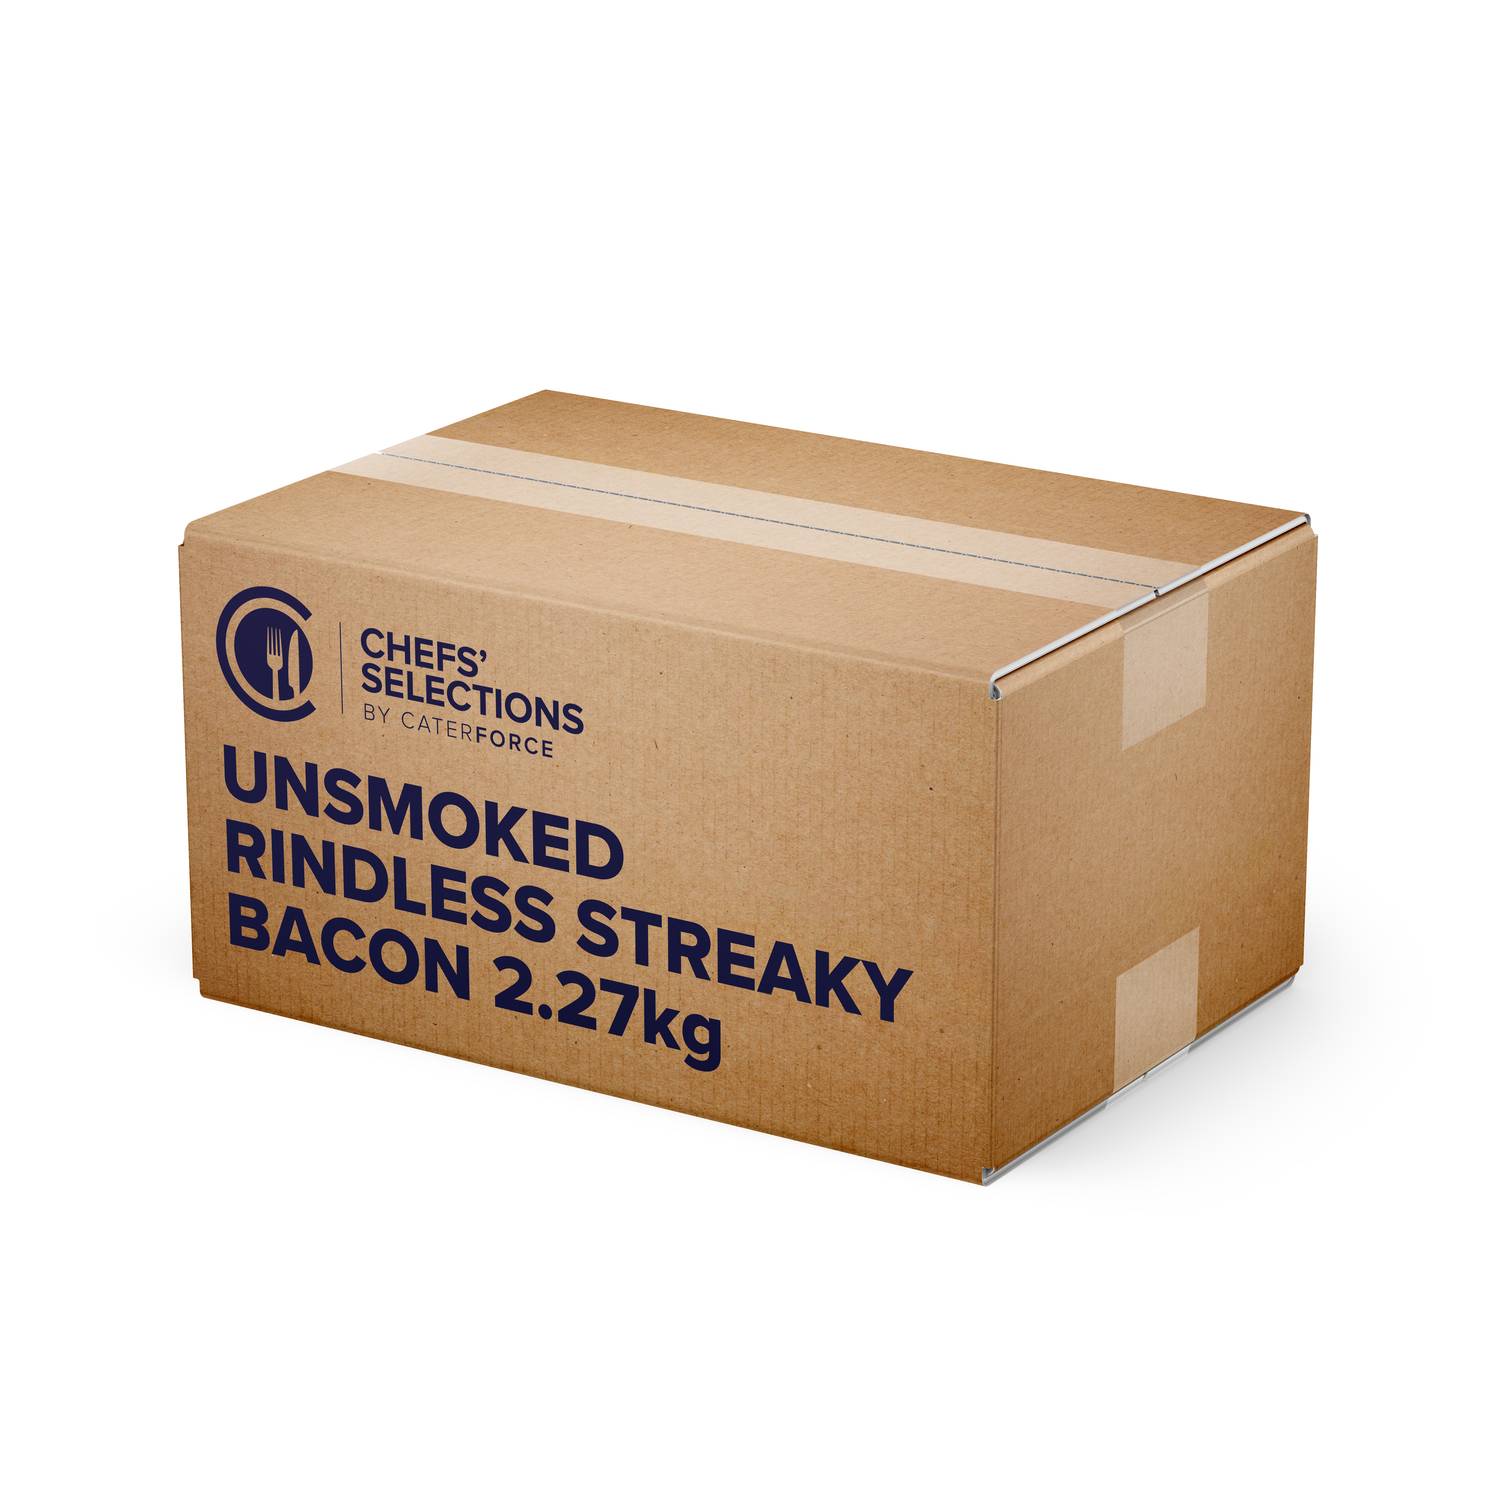 Chefs’ Selections Unsmoked Rindless Streaky Bacon (4 x 2.27kg)